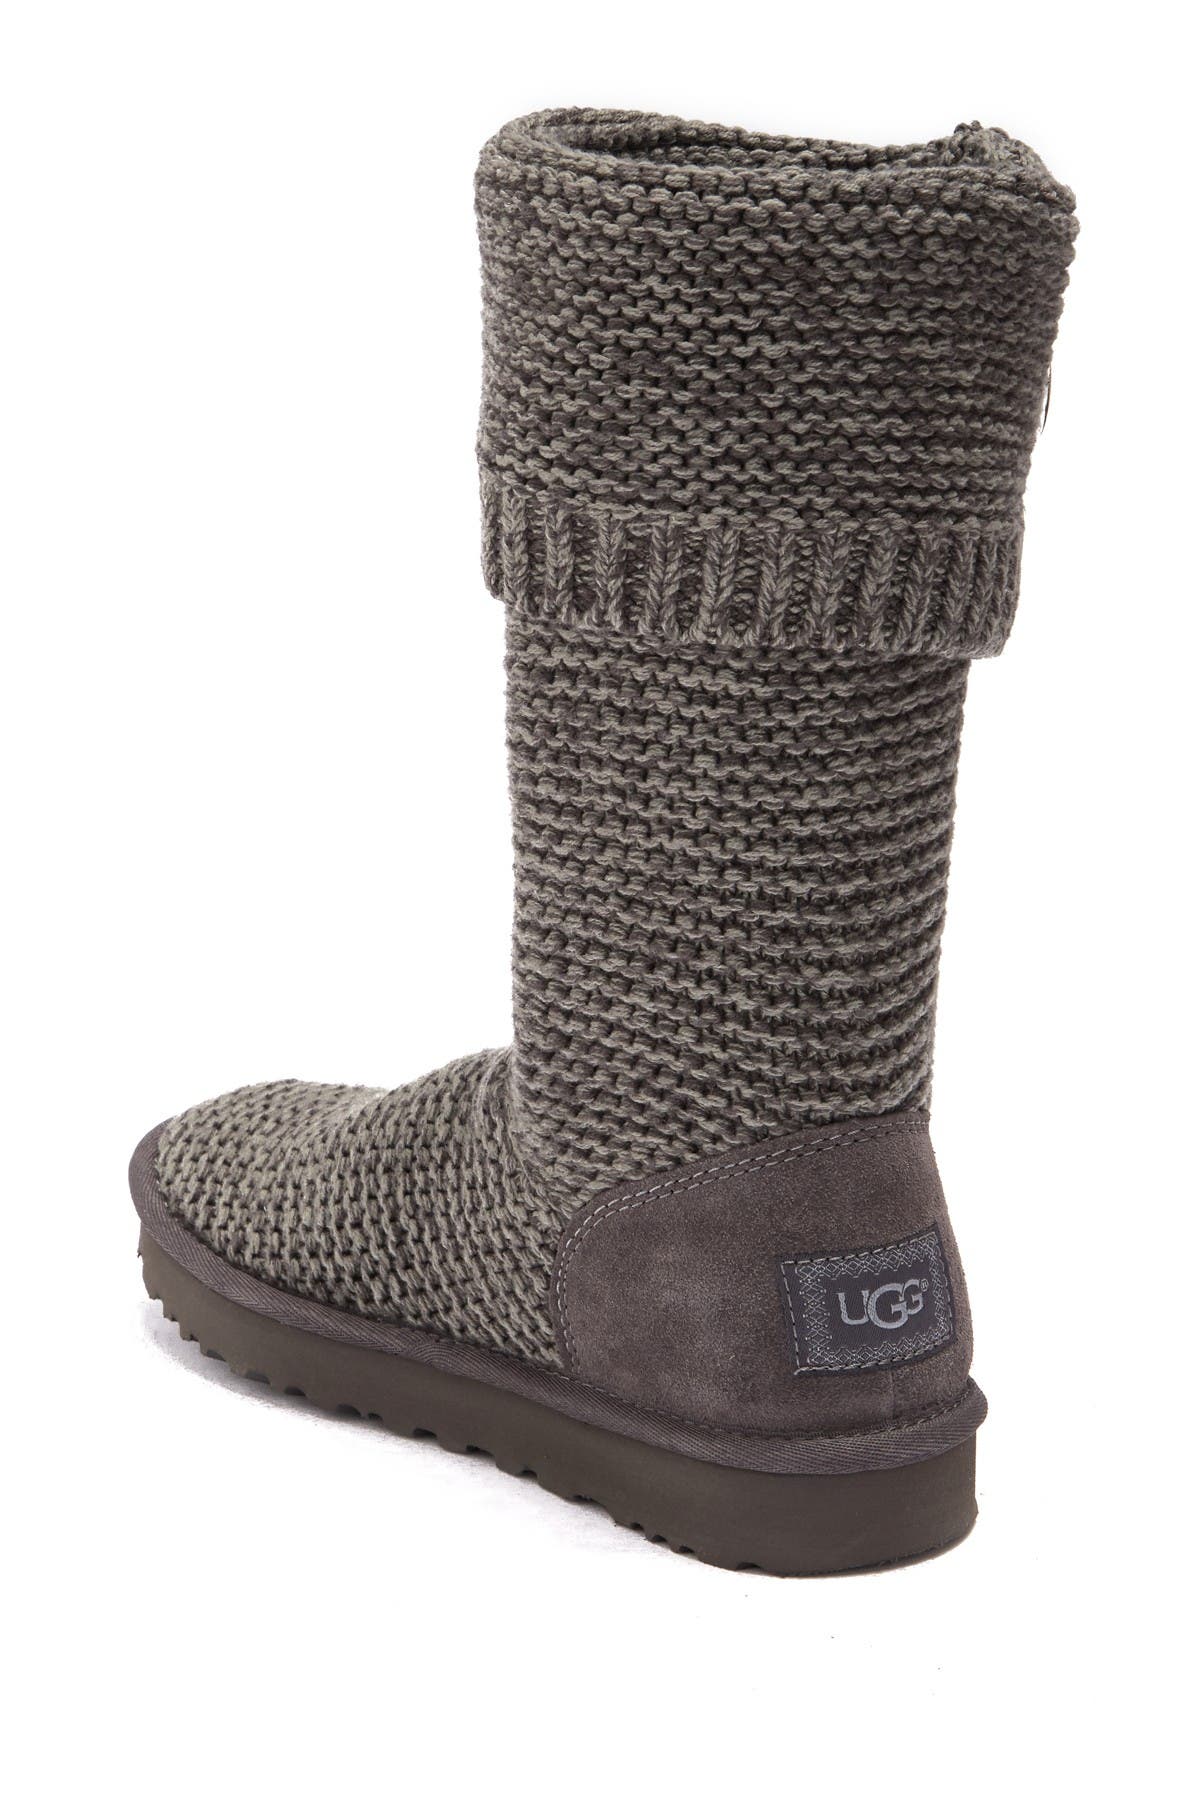 ugg purl cardy knit